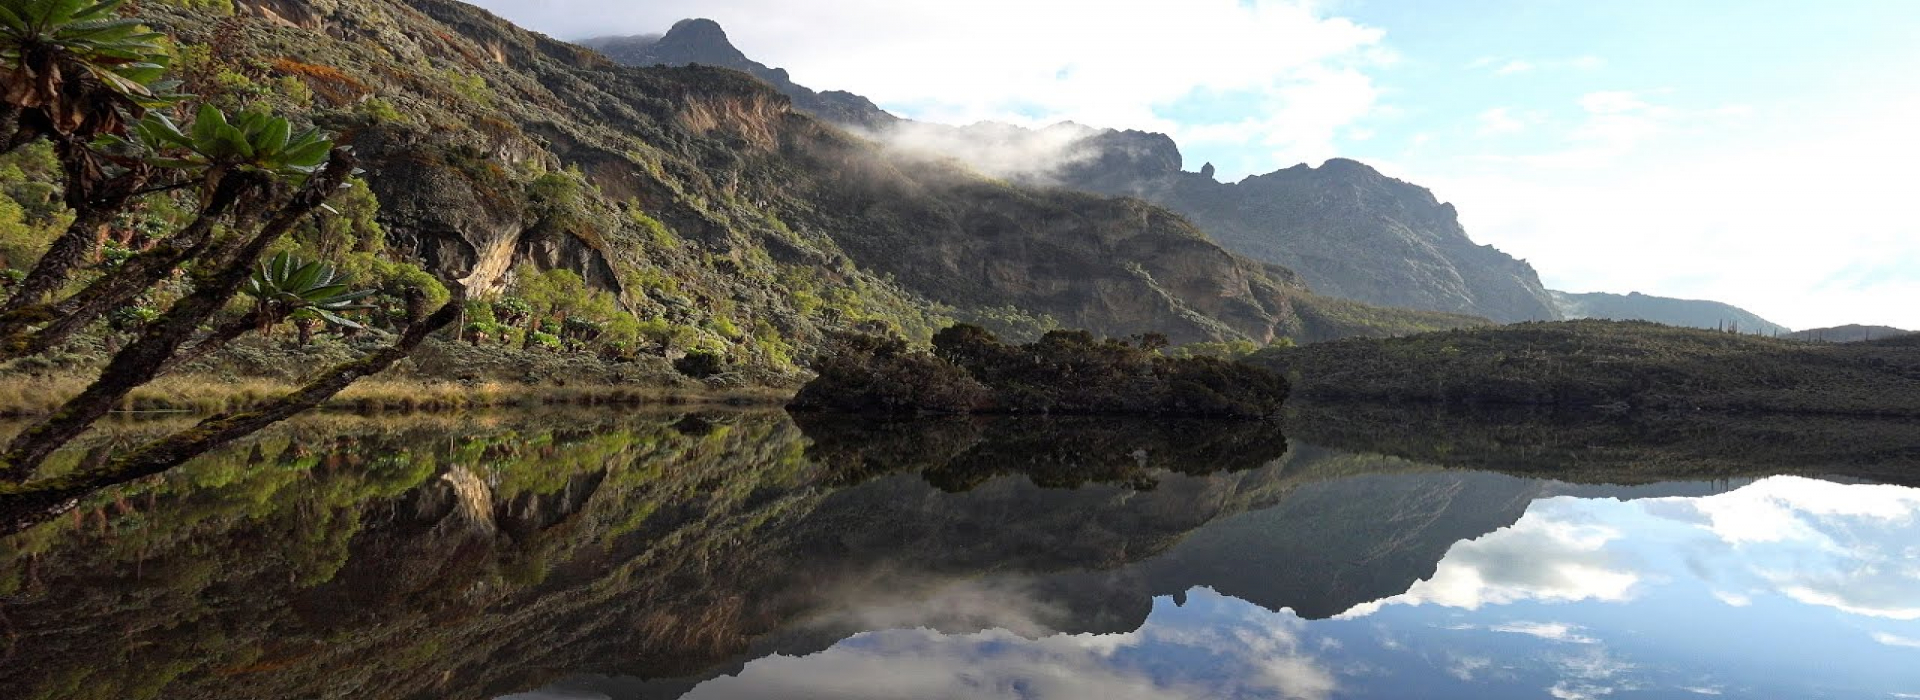 Background Image for Rwenzori Mountains National Park